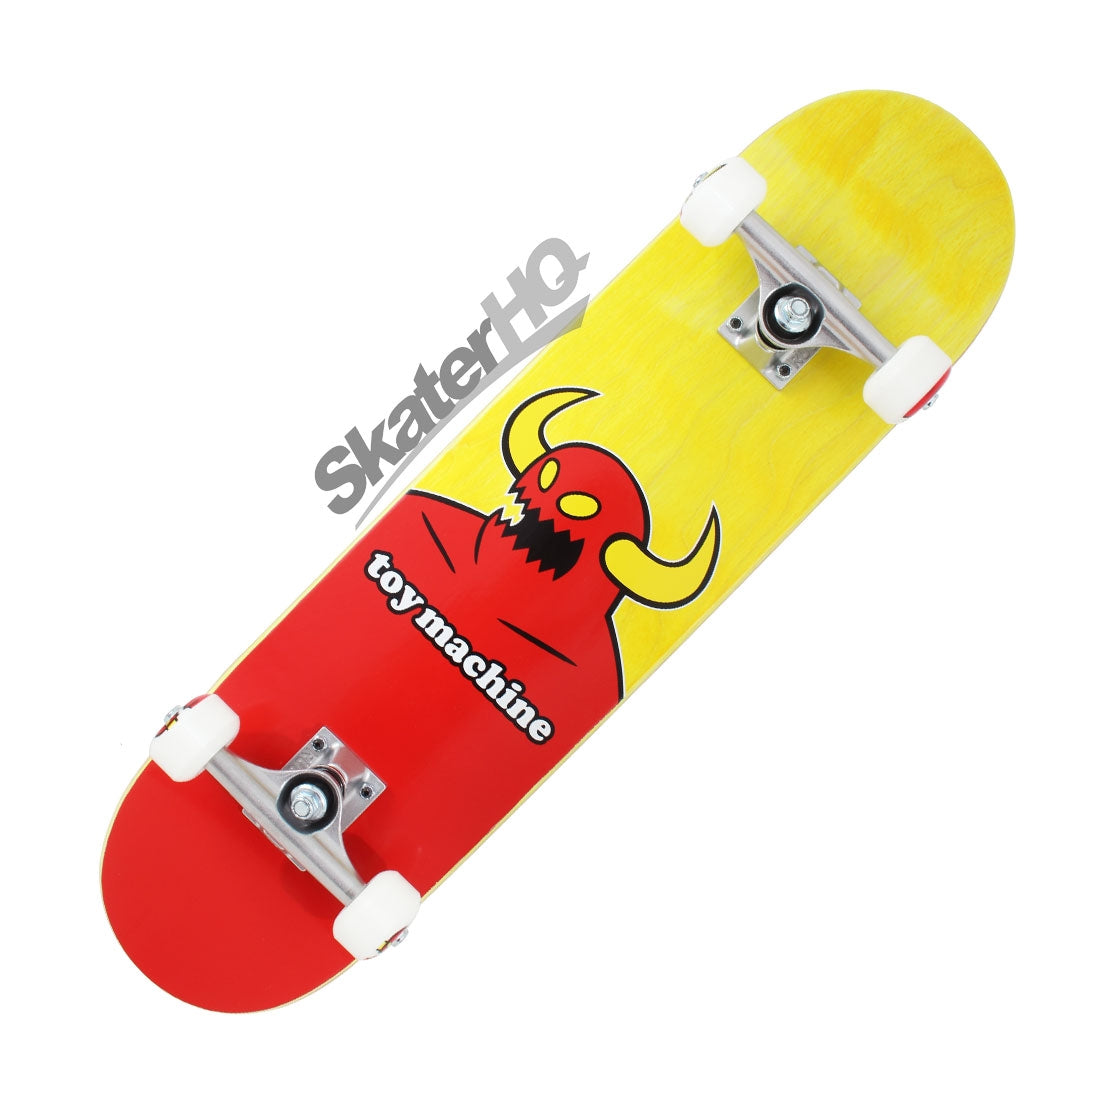 Toy Machine Monster 7.375 Complete - Yellow Skateboard Completes Modern Street